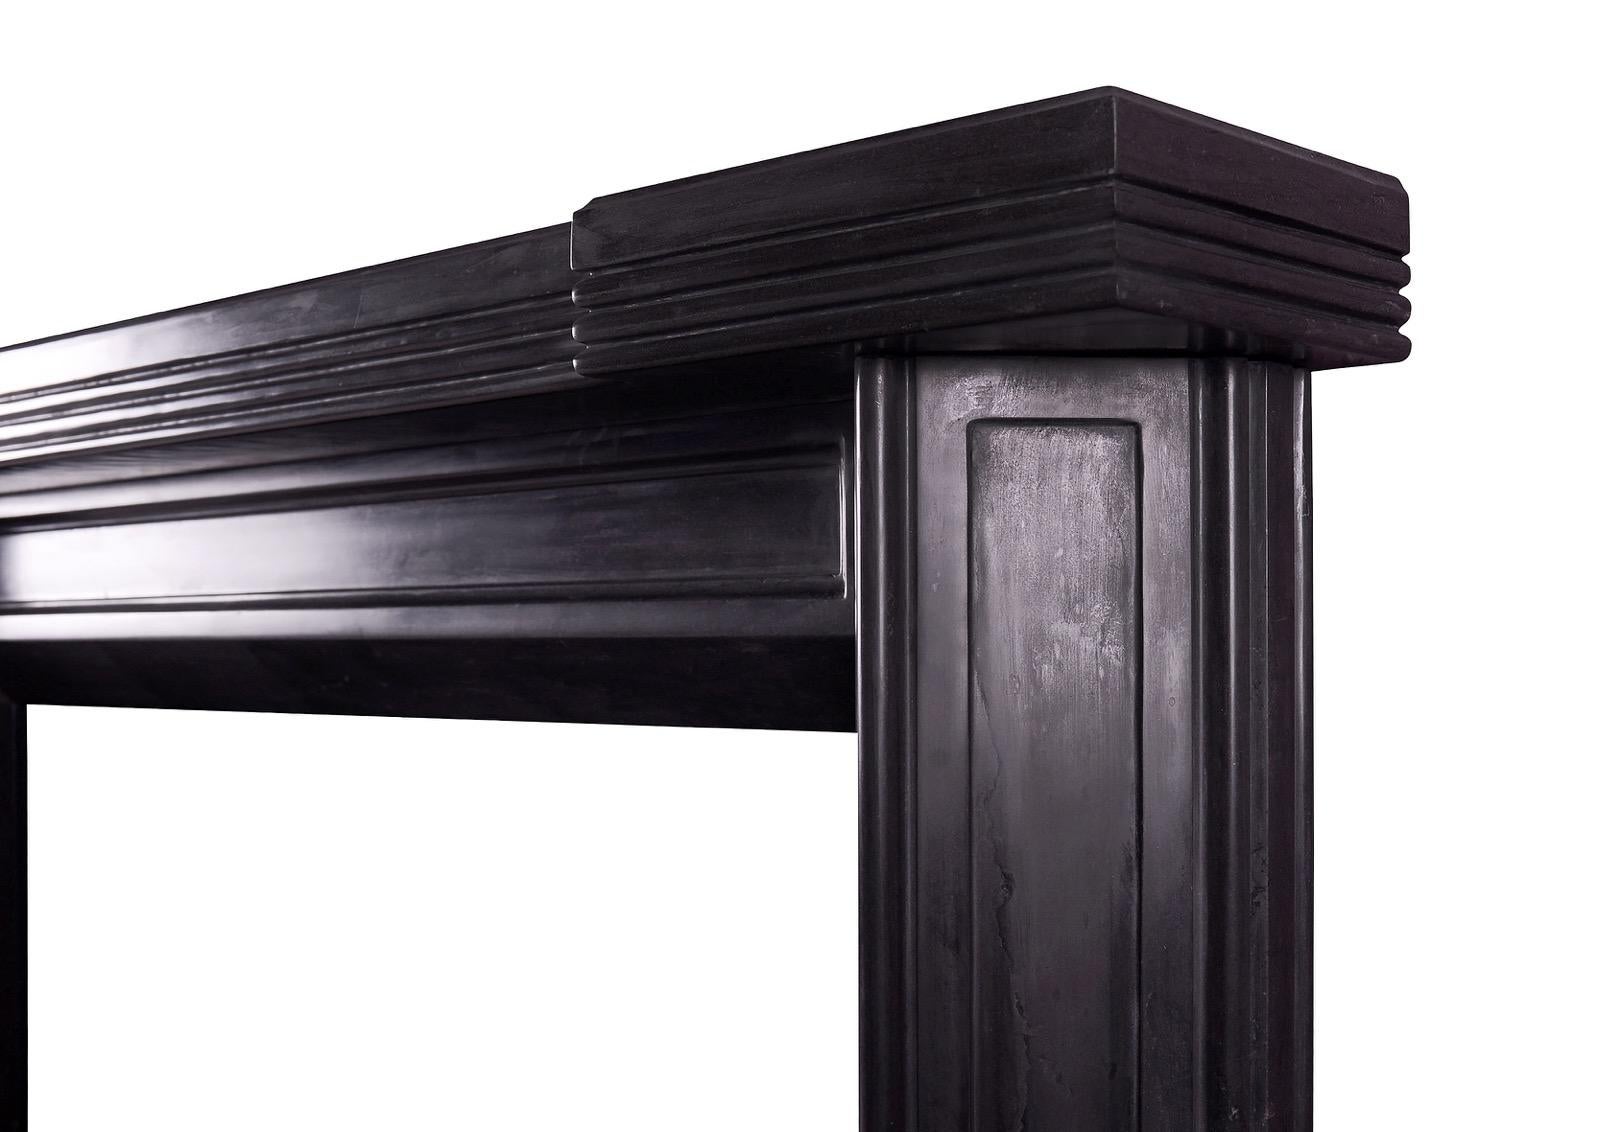 An unusual Art Deco style fireplace in black marble. The triangular, panelled jambs surmounted by panelled frieze and reeded shelf. A copy of an early 20th century original. A clean design in a marble would suit the Classic or the